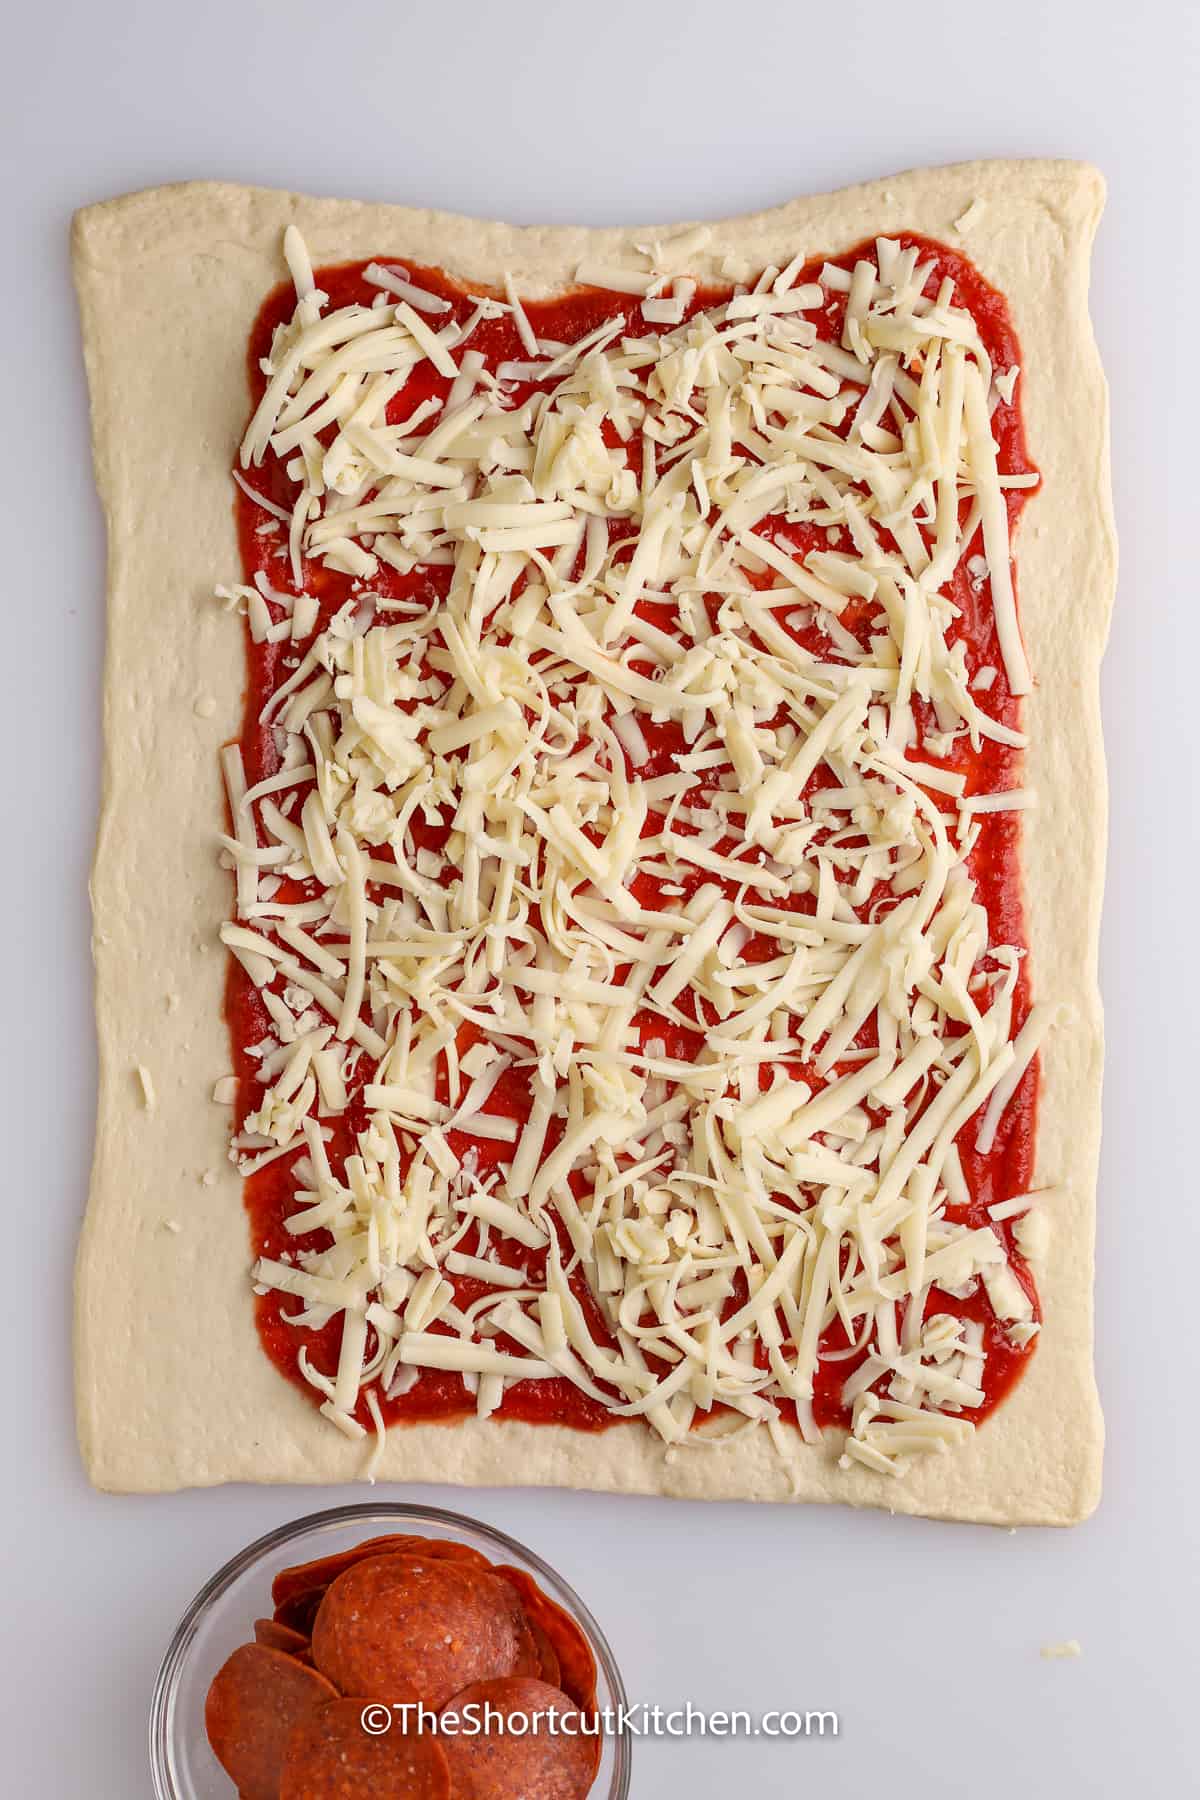 cheese added to pizza dough